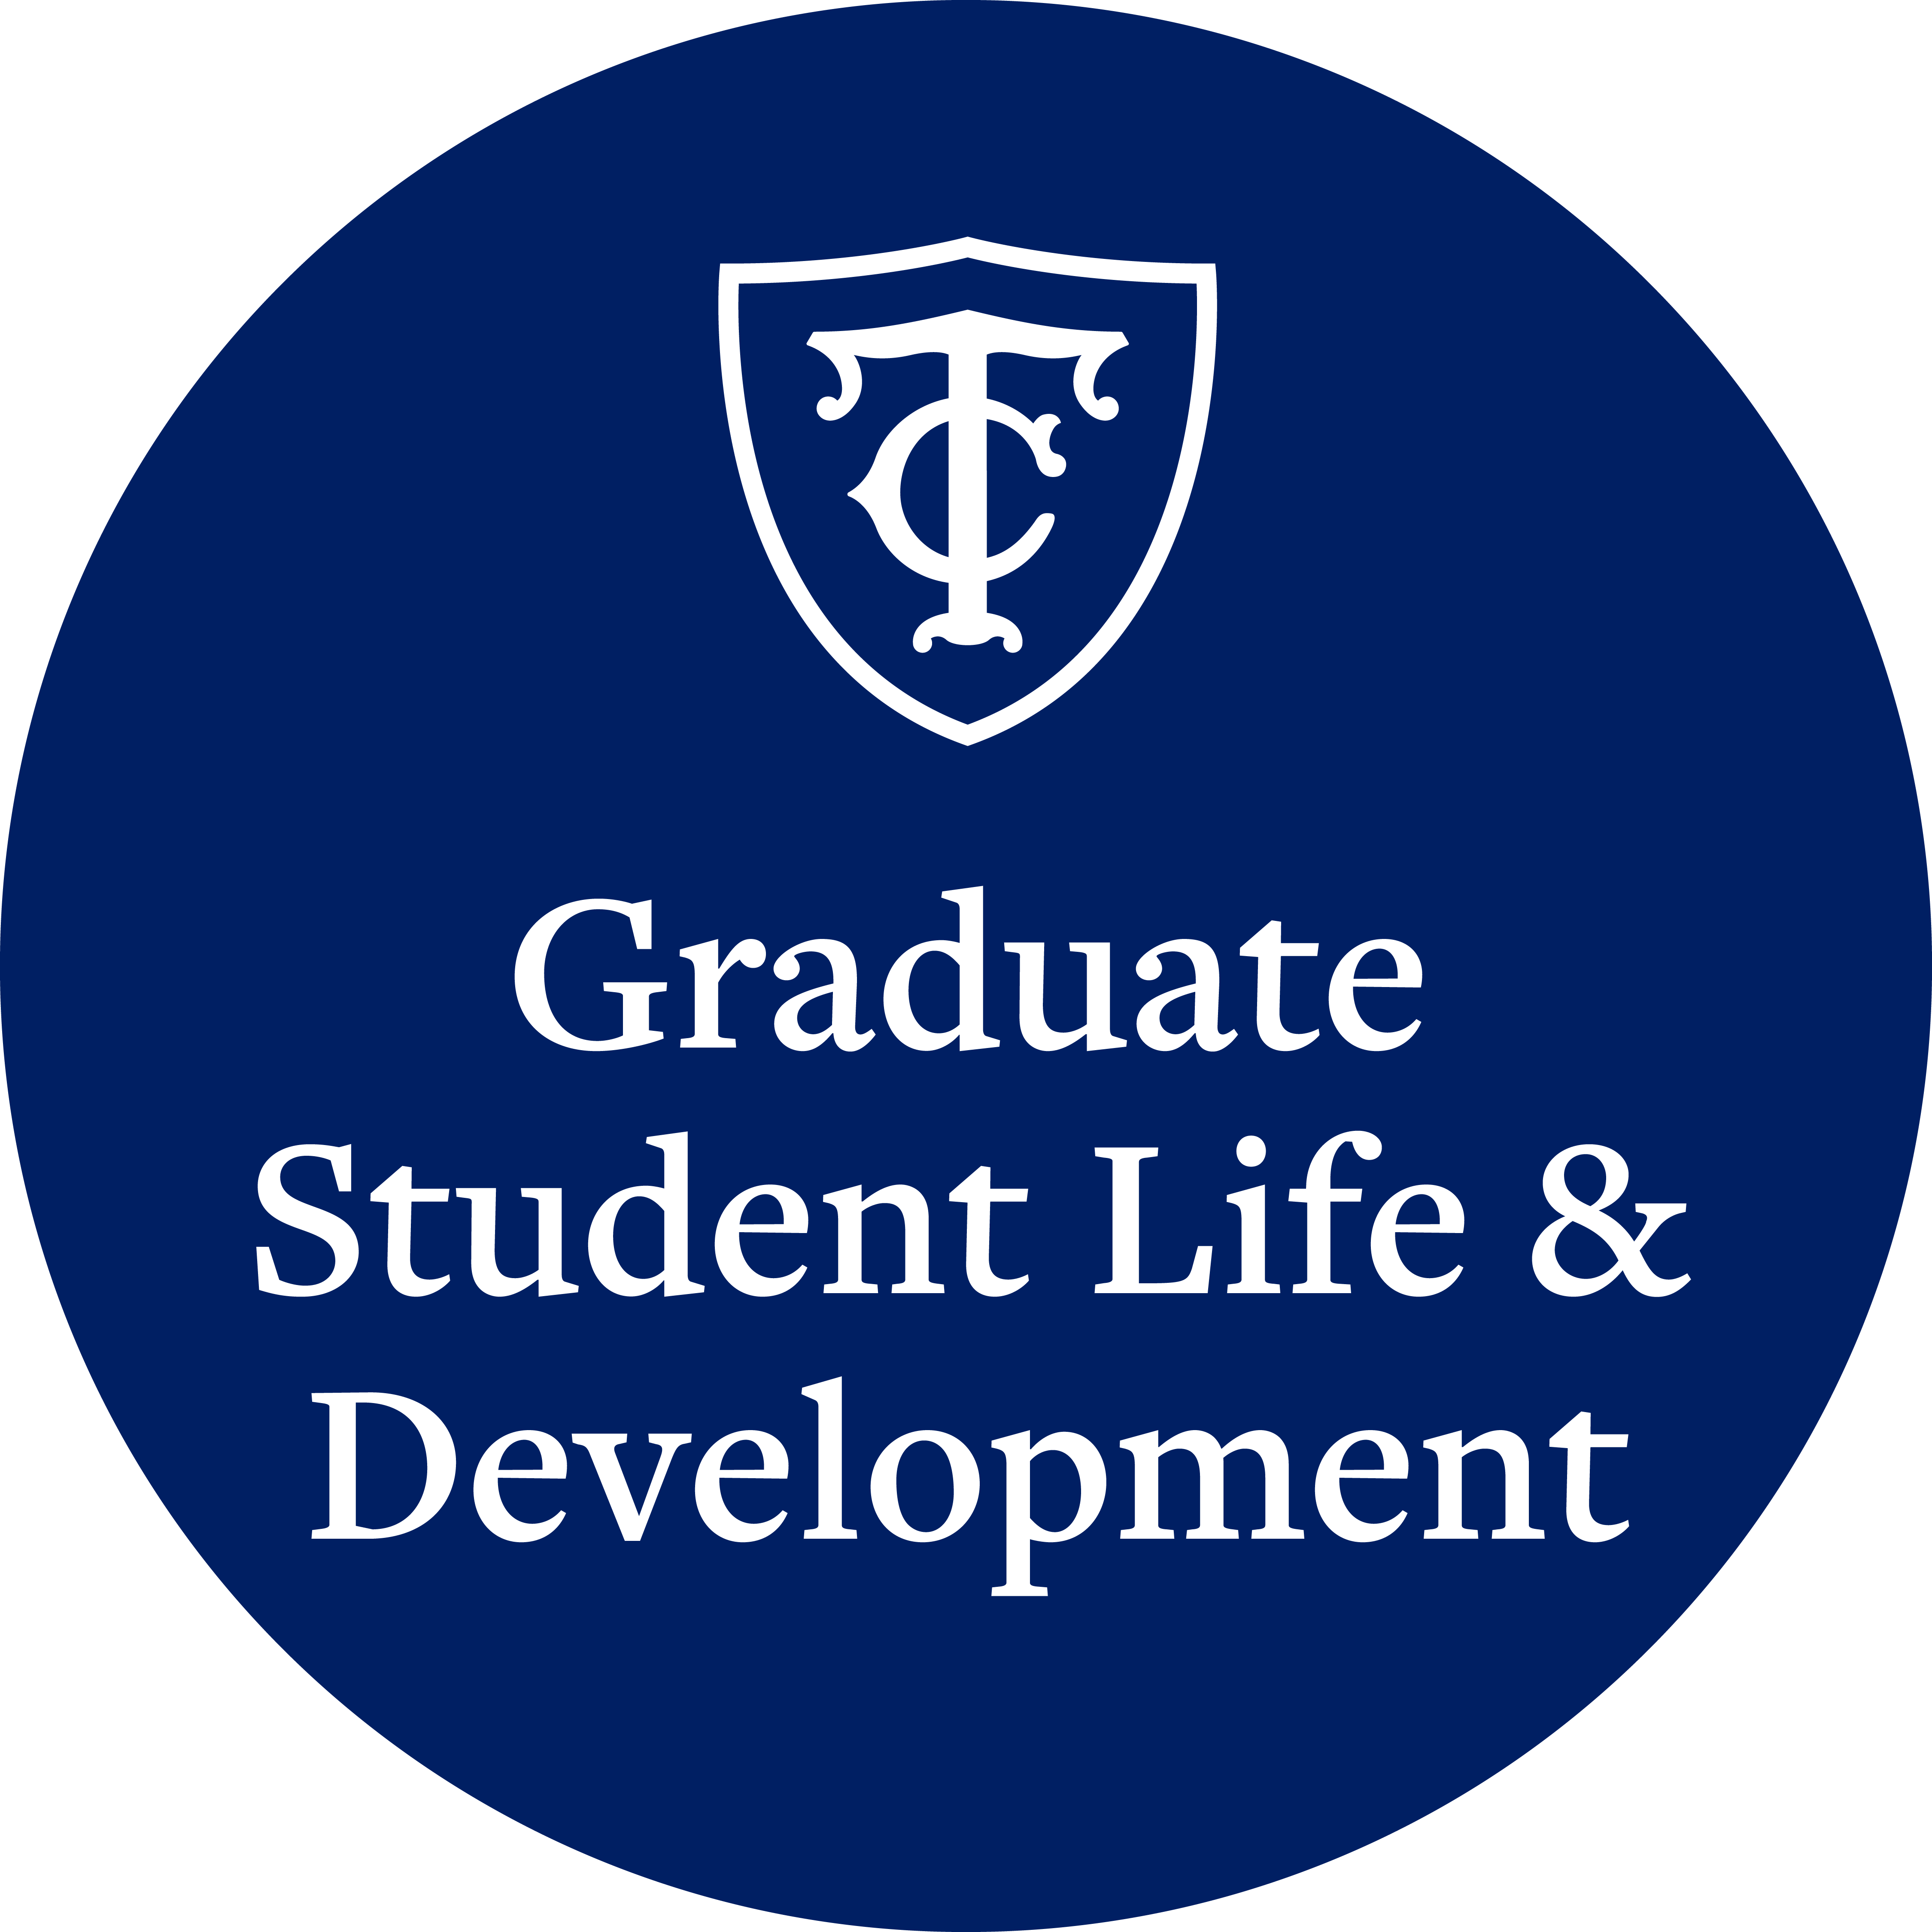 Circular logo with navy background and white text: Centered TC shield with Graduate Student Life and Development below